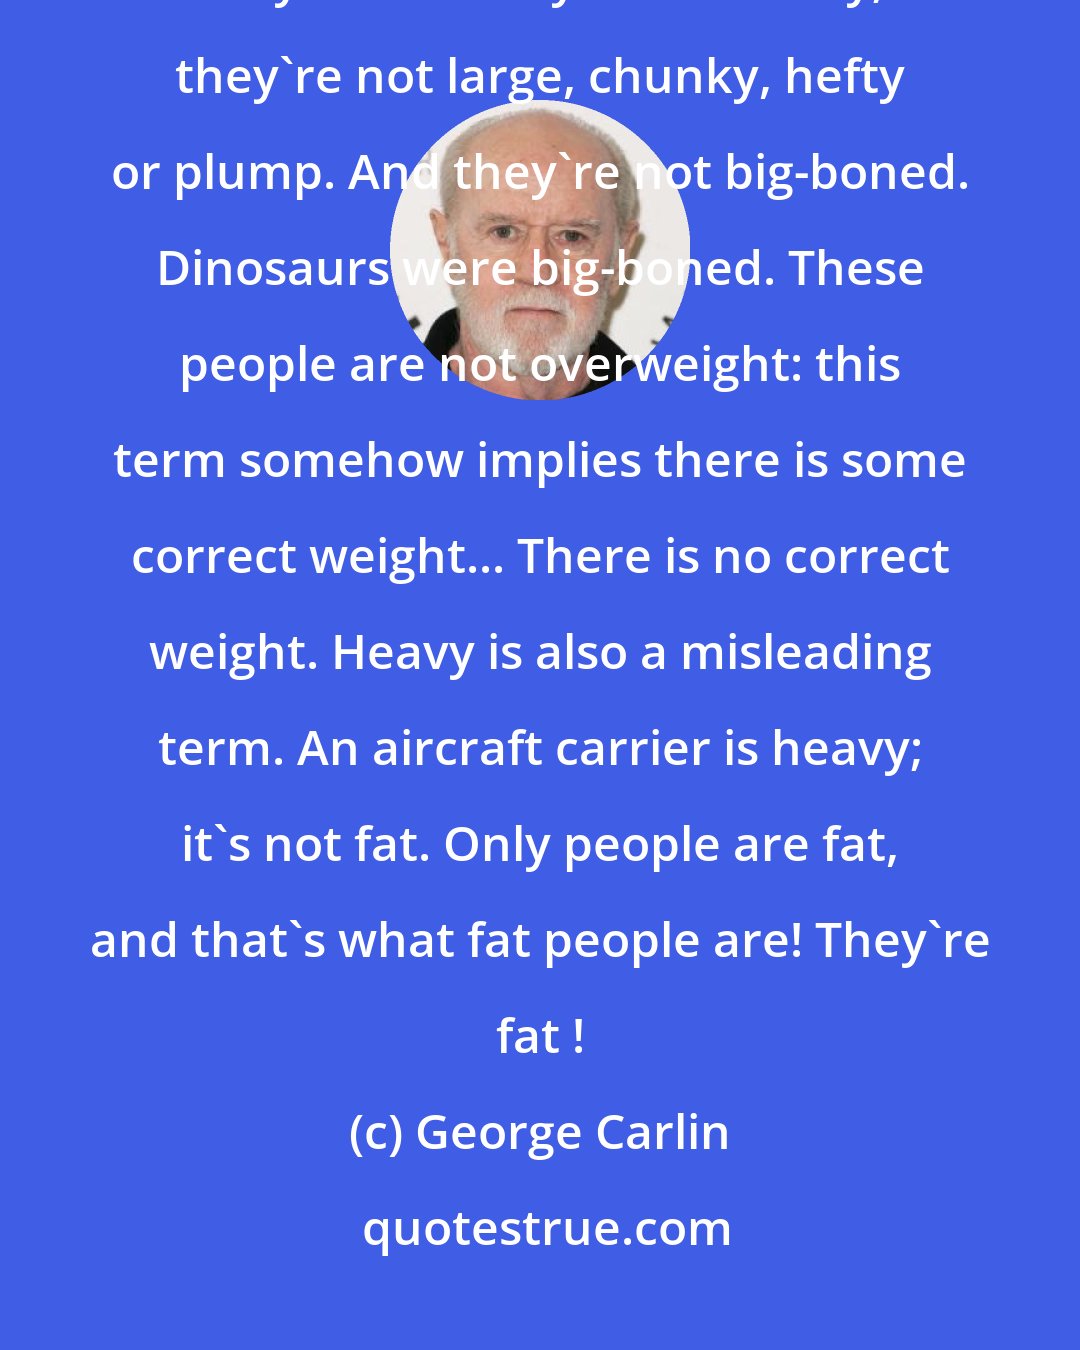 George Carlin: I use the word 'fat'. I use that word because that's what people are: they're fat. They're not bulky; they're not large, chunky, hefty or plump. And they're not big-boned. Dinosaurs were big-boned. These people are not overweight: this term somehow implies there is some correct weight... There is no correct weight. Heavy is also a misleading term. An aircraft carrier is heavy; it's not fat. Only people are fat, and that's what fat people are! They're fat !